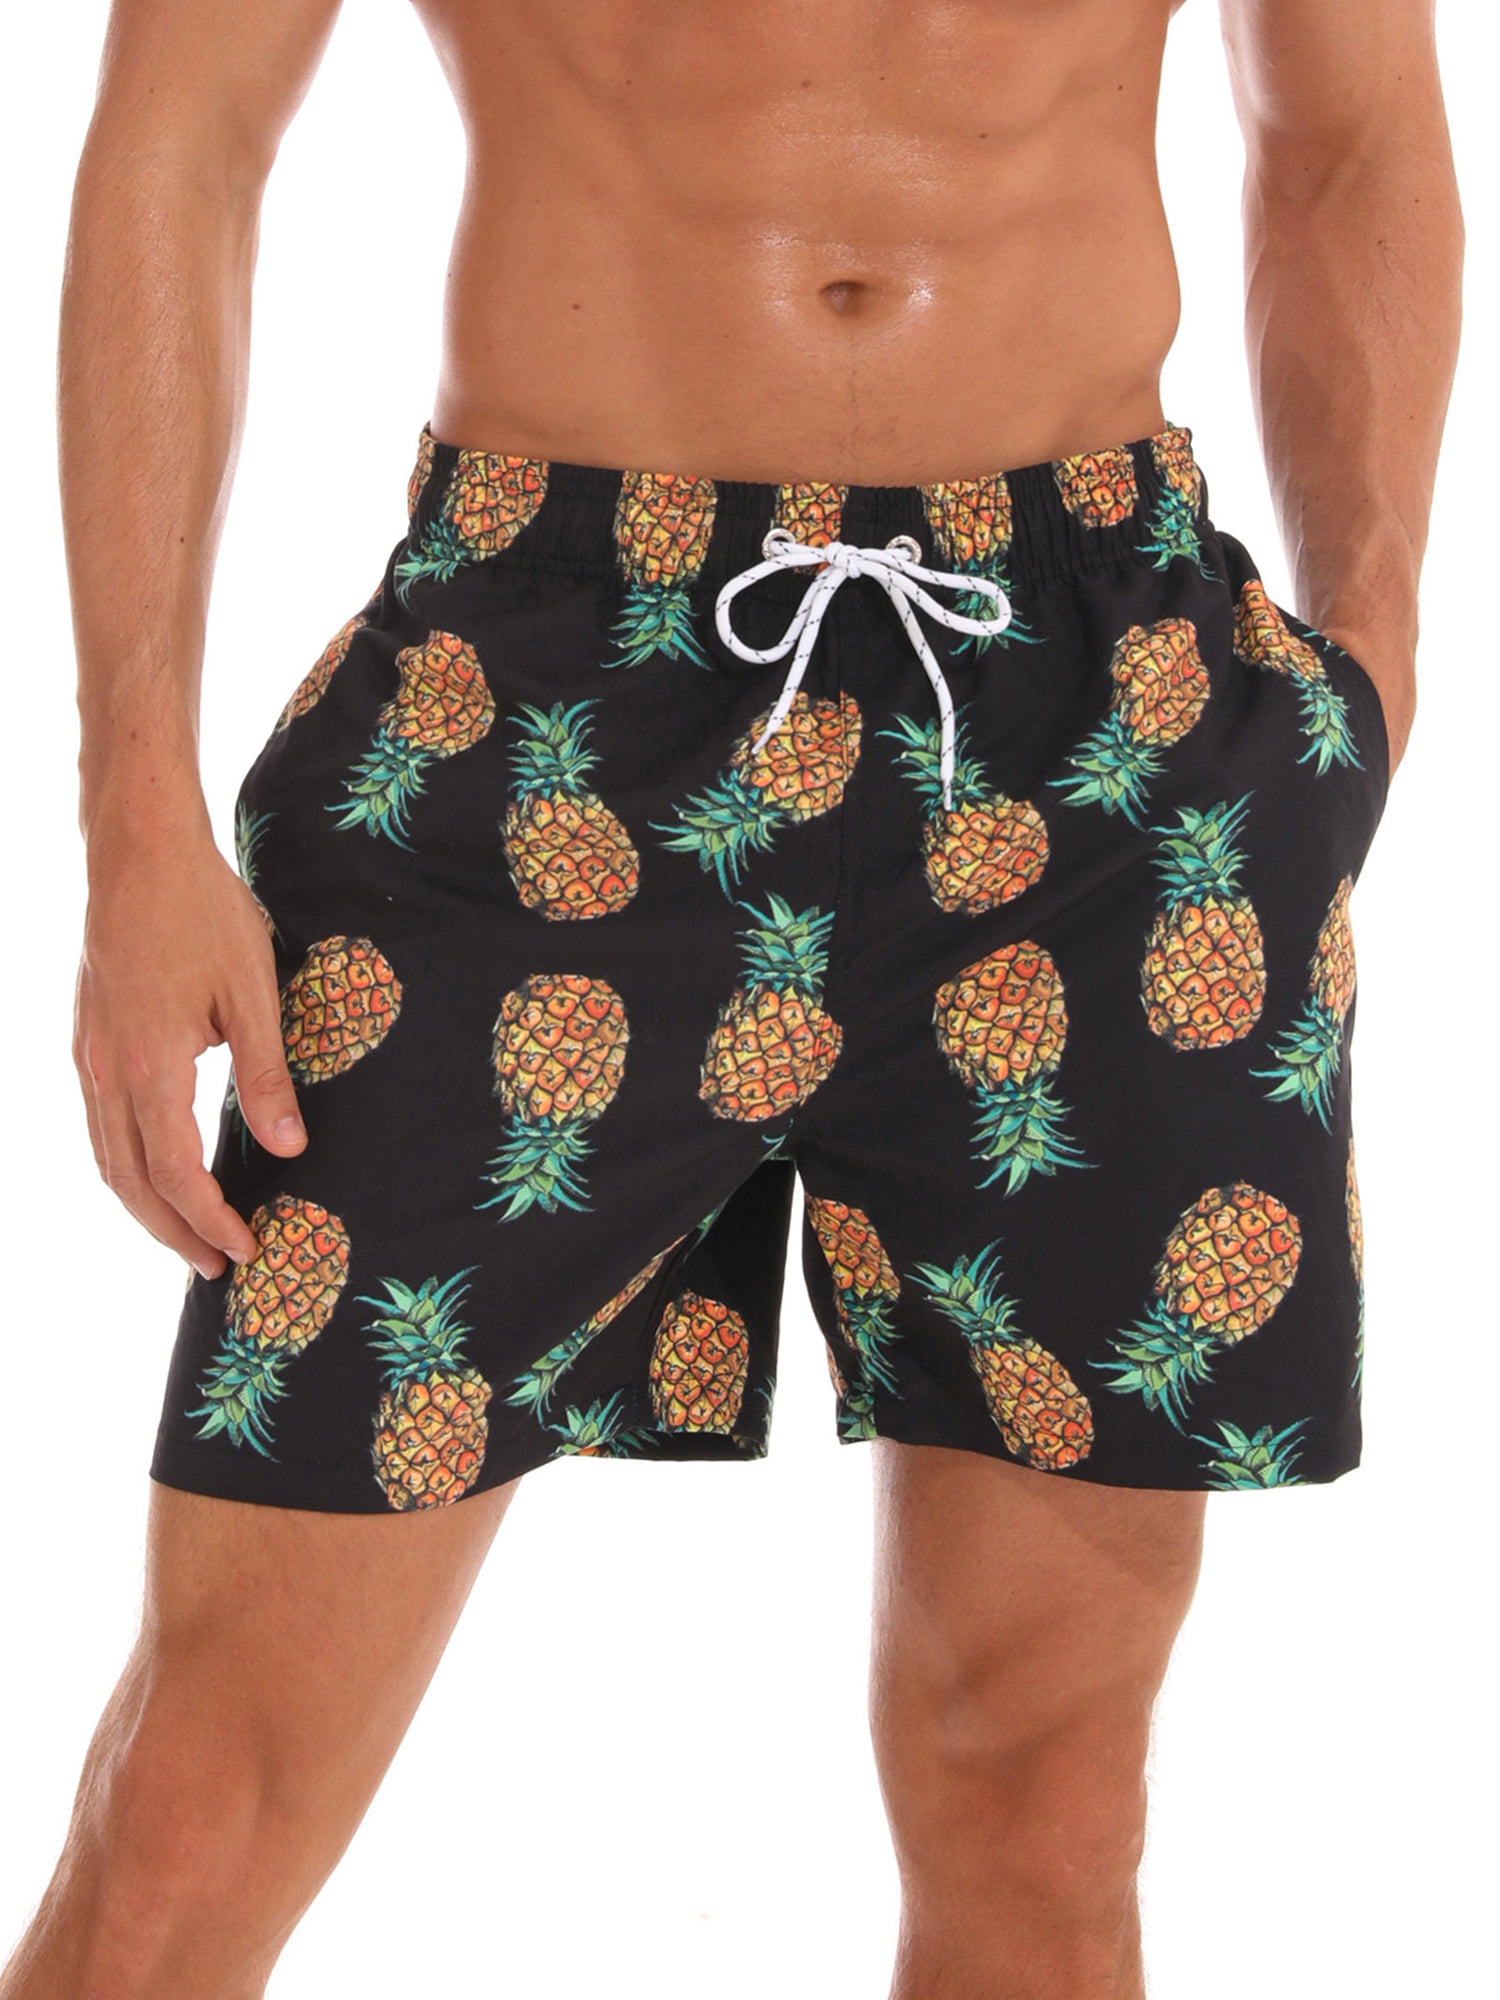 Pineapple New Men's Classic Cargo Shorts Outdoor Casual Pants Beach Pants